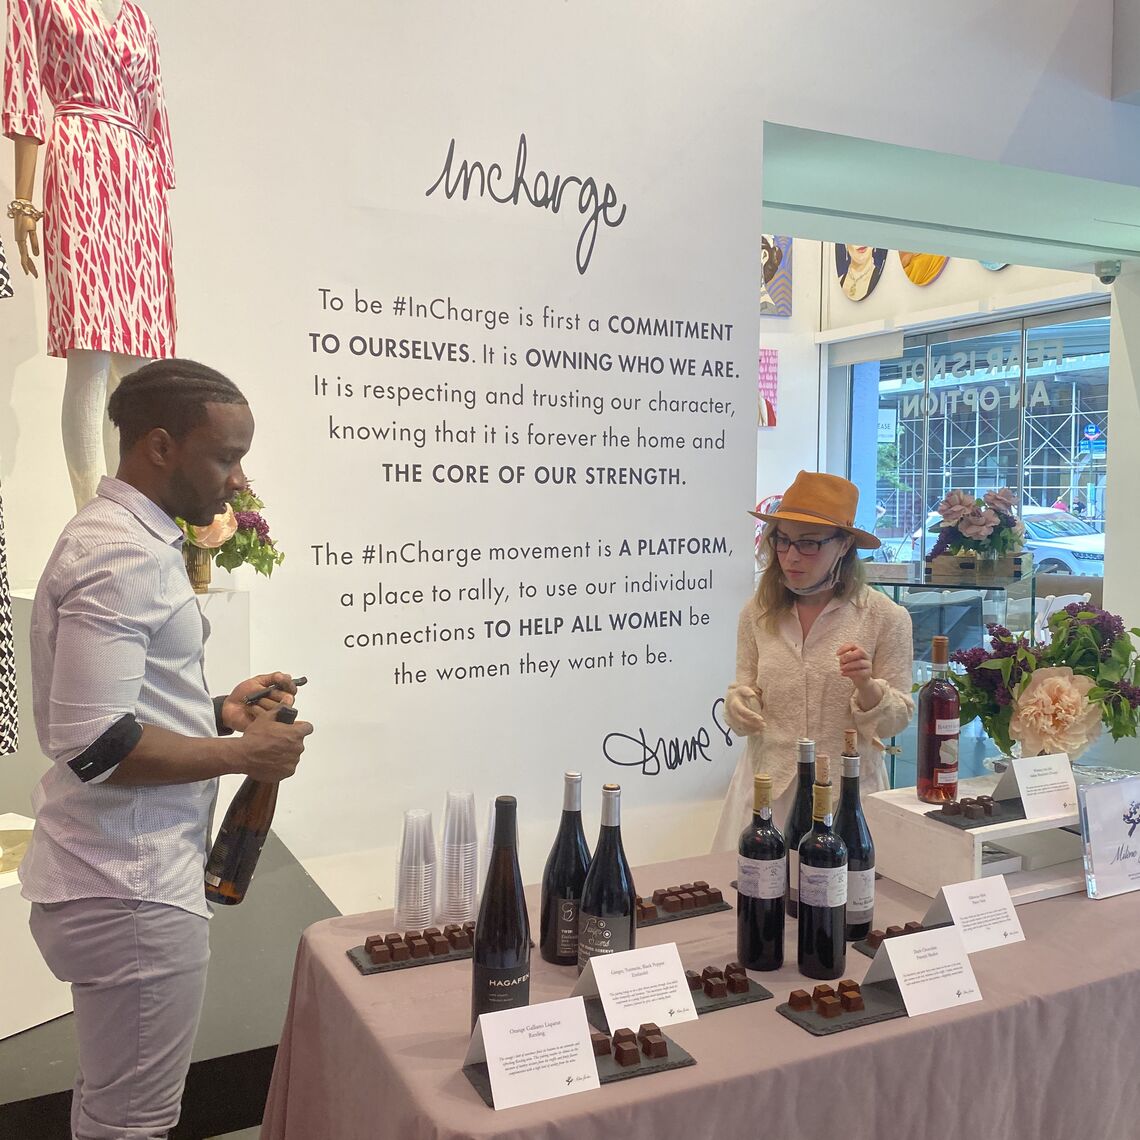 Photo from a Diane von Furstenburg (DVF) InCharge event Shen helped coordinate. "InCharge is the core concept at DVF," Shen said. "It's dedicated to building up a community to support and help women to be someone they want to be."